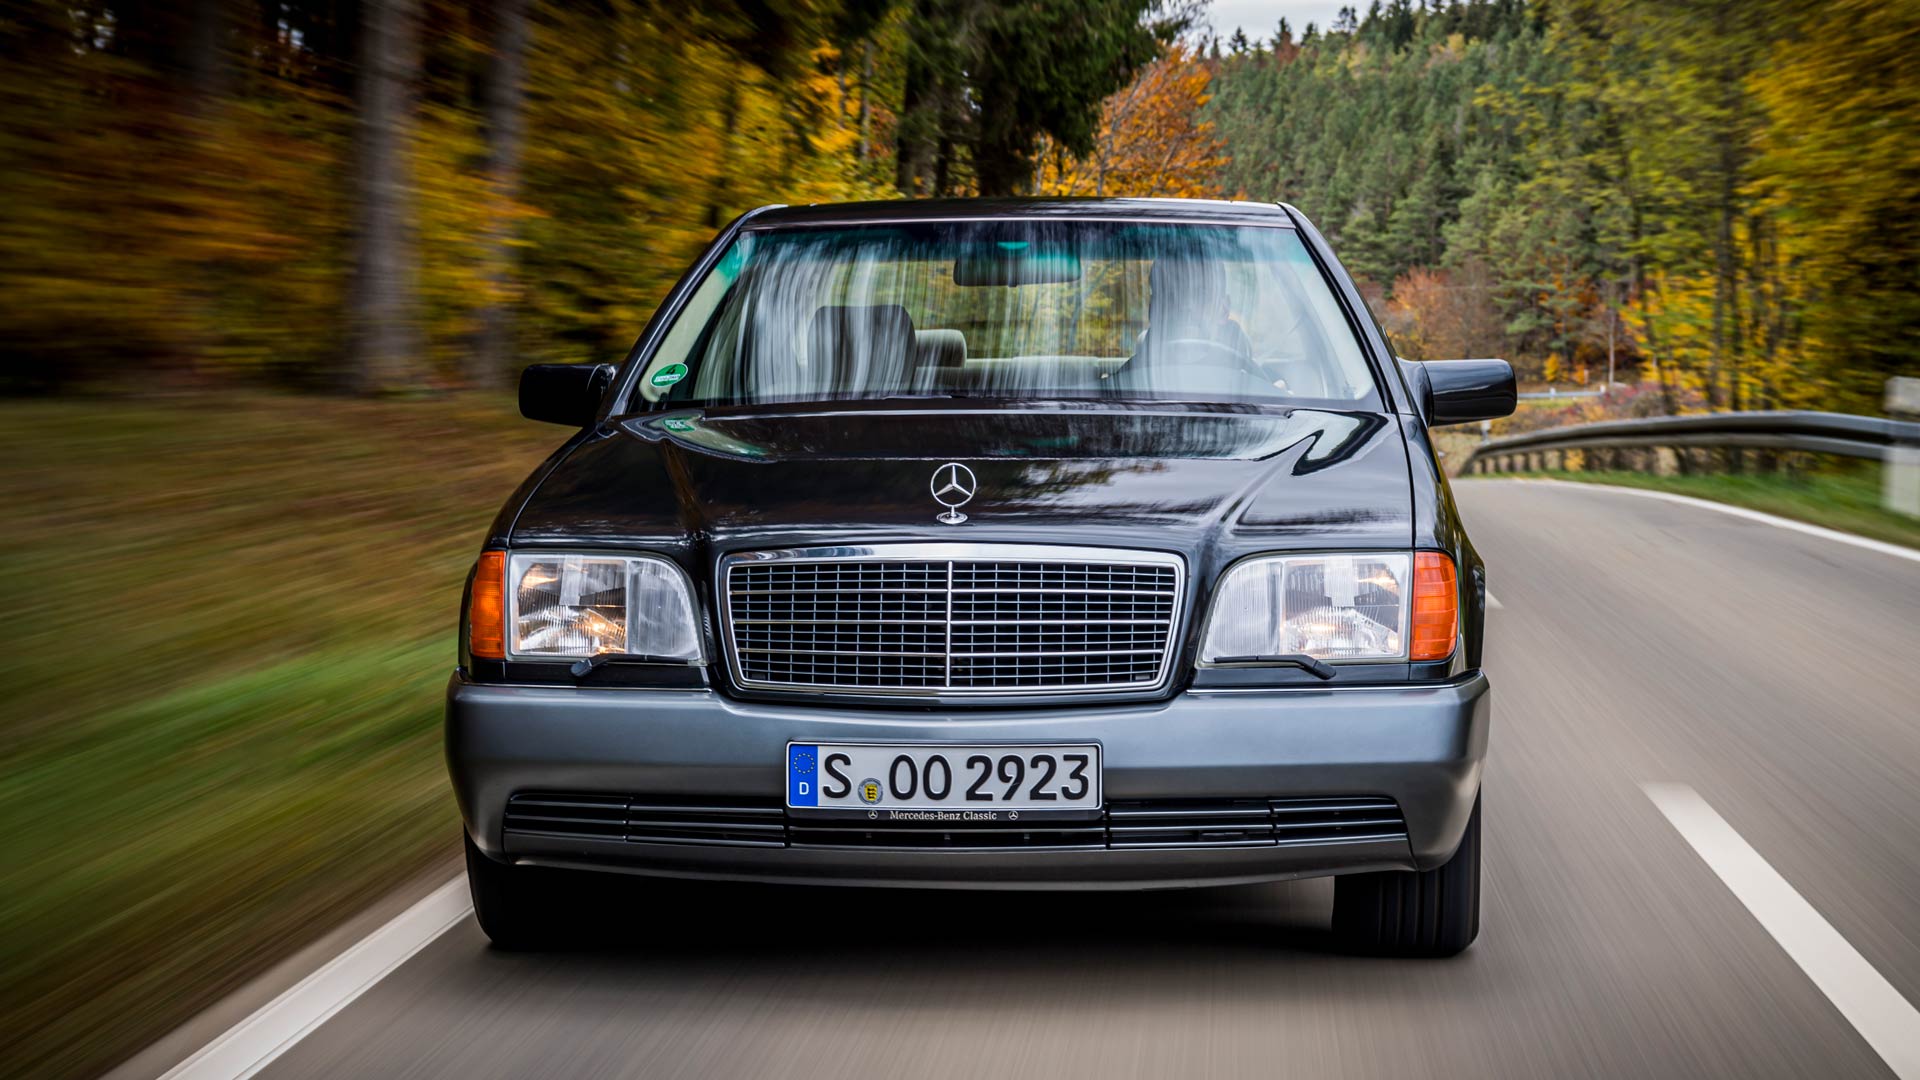 W140 S-Class is a classic